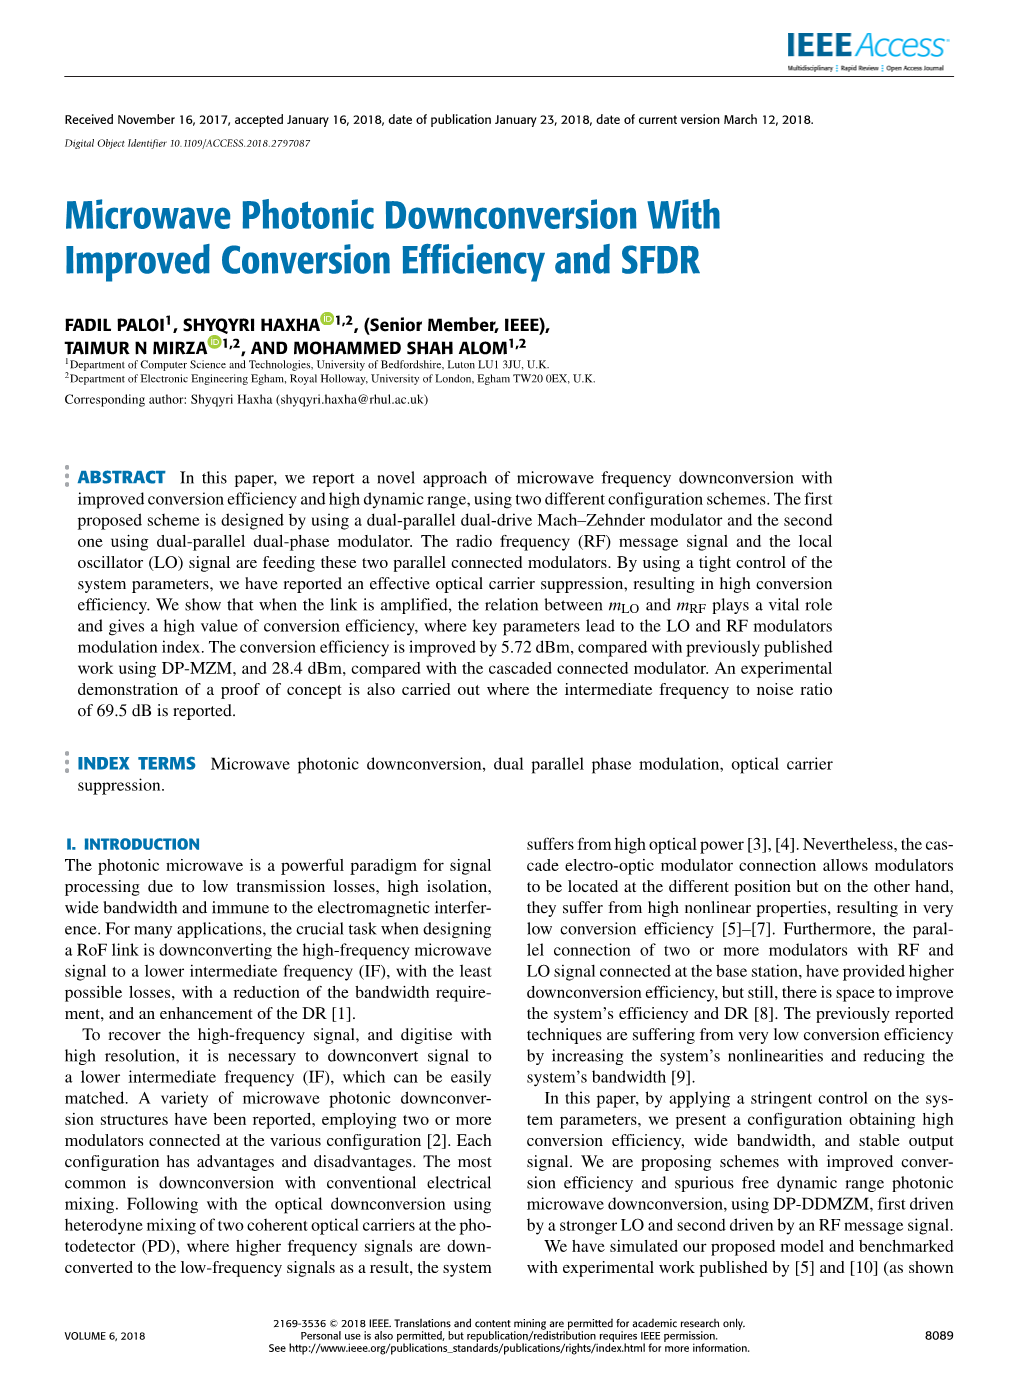 Microwave Photonic Downconversion with Improved Conversion Efficiency and SFDR